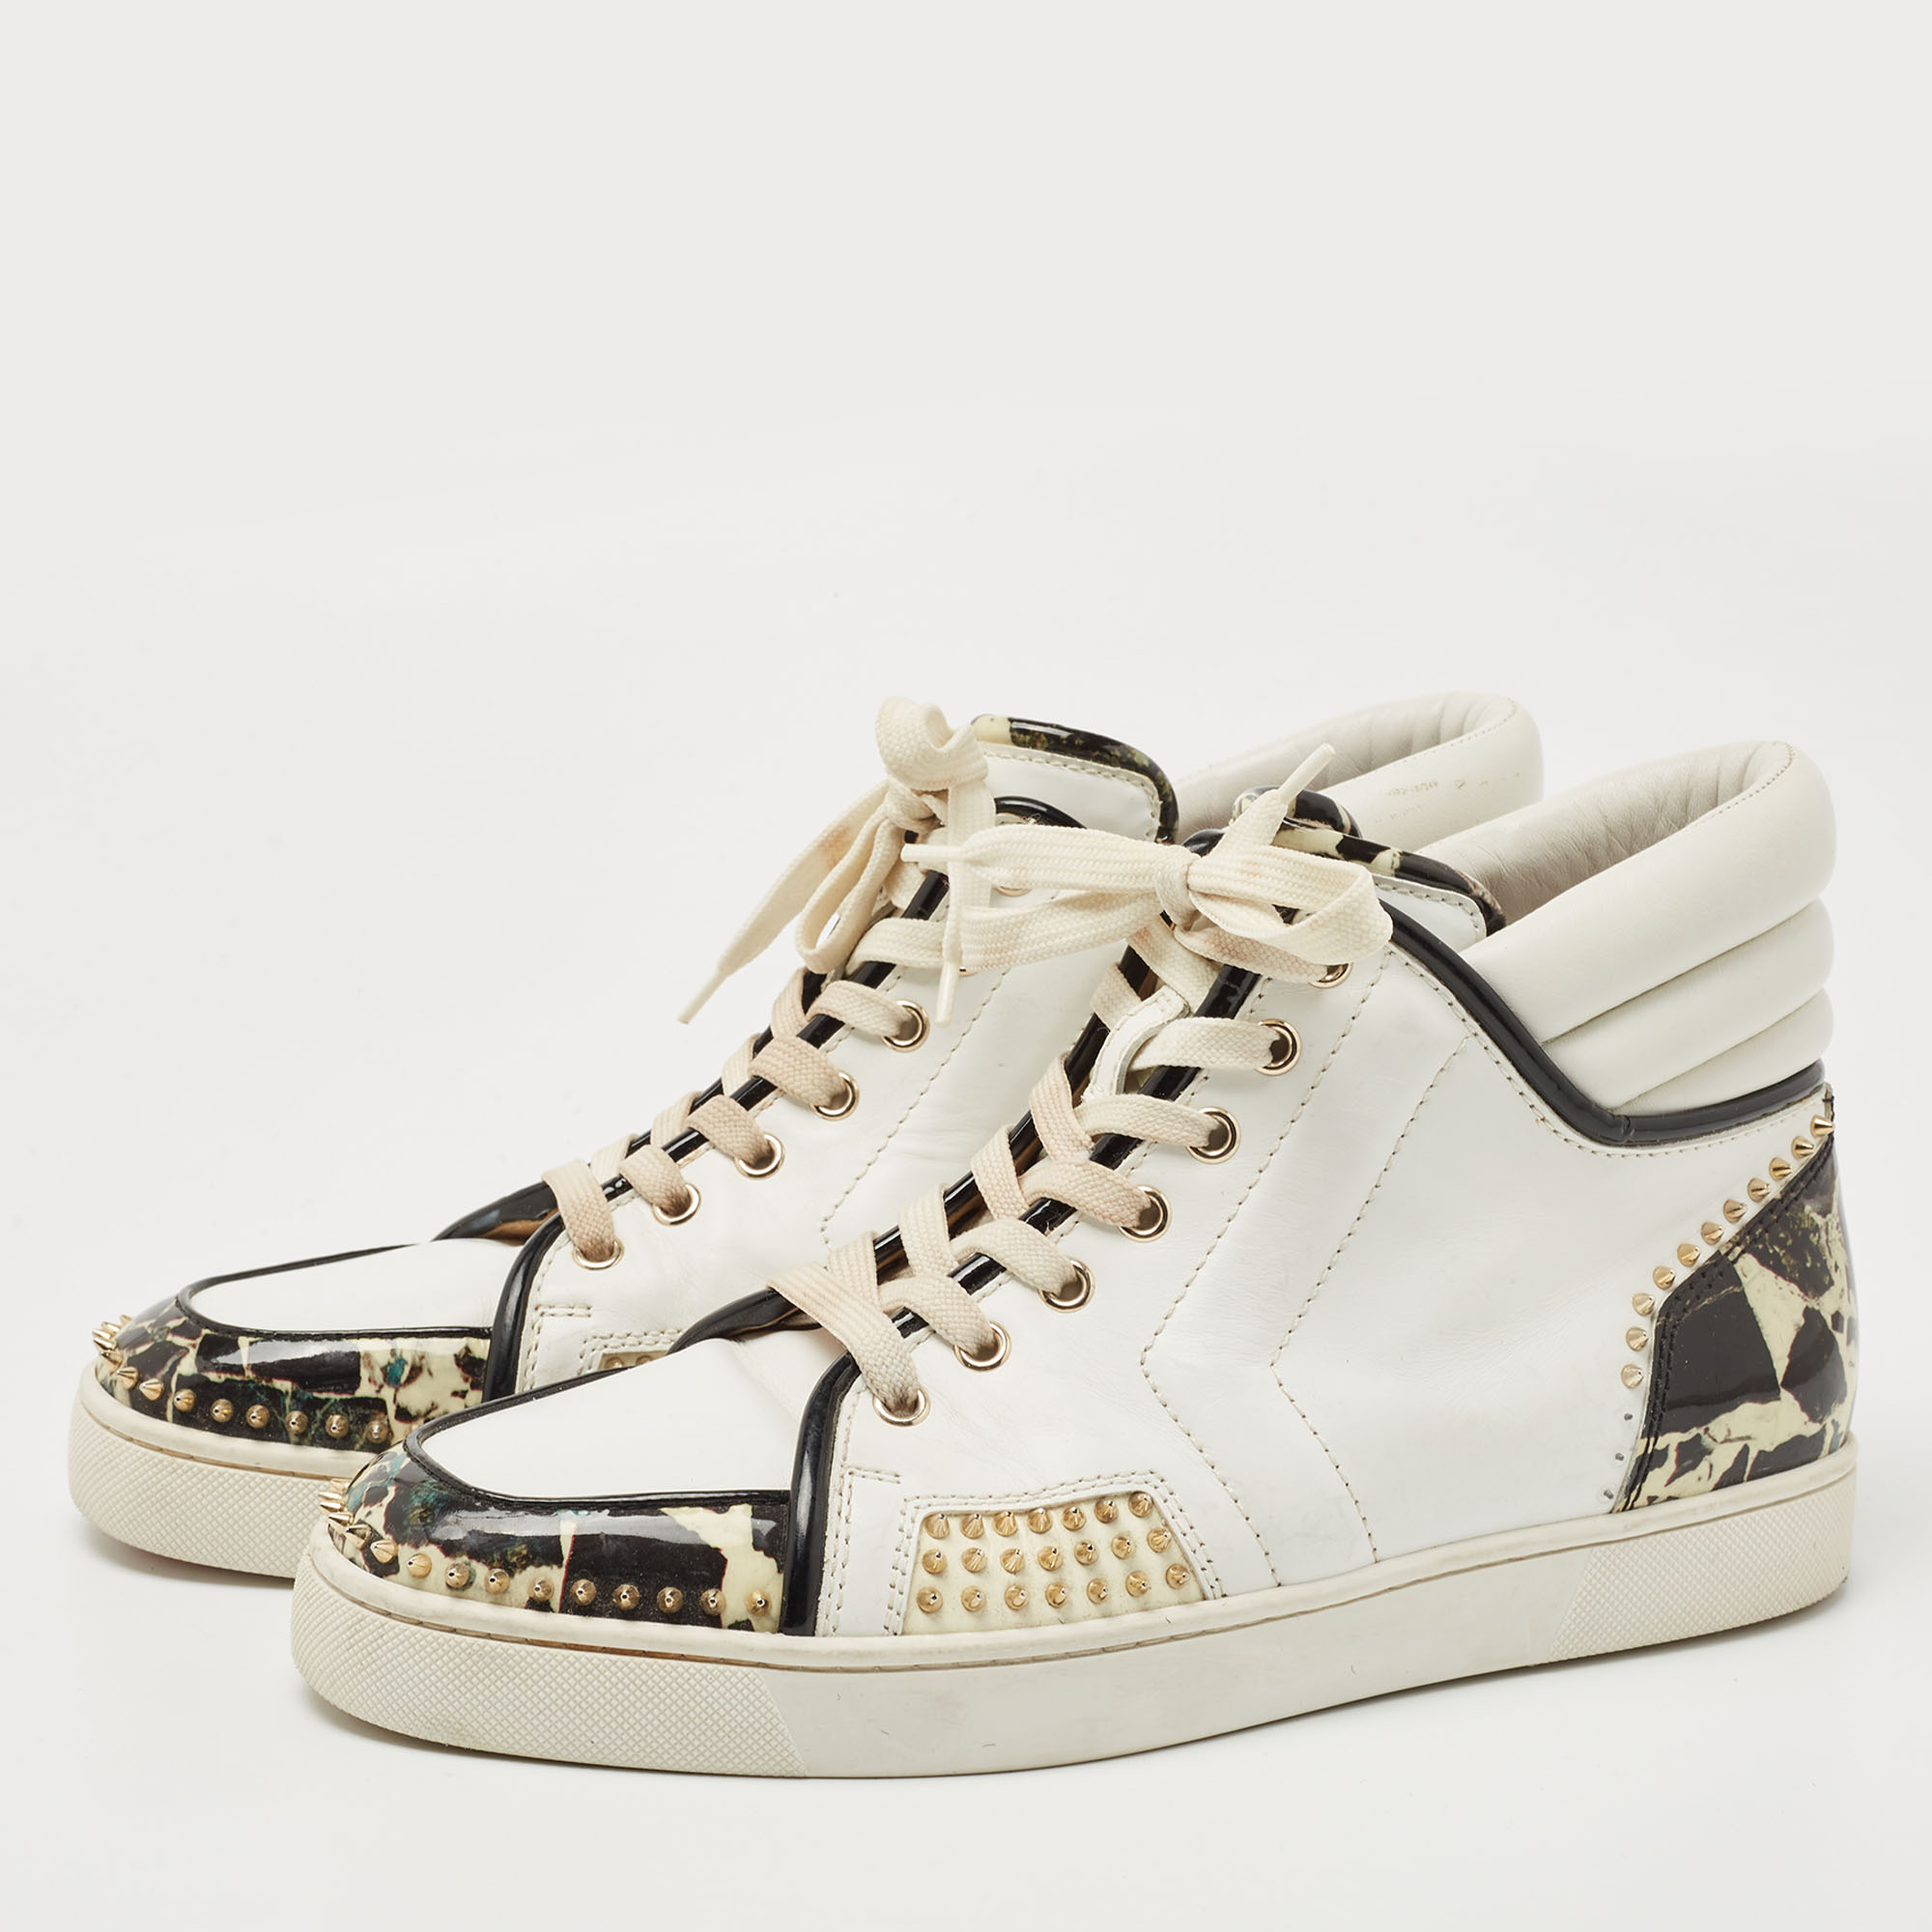 

Christian Louboutin Tricolor Leather and Stone Print Patent Spikes High Top Sneakers Size, White